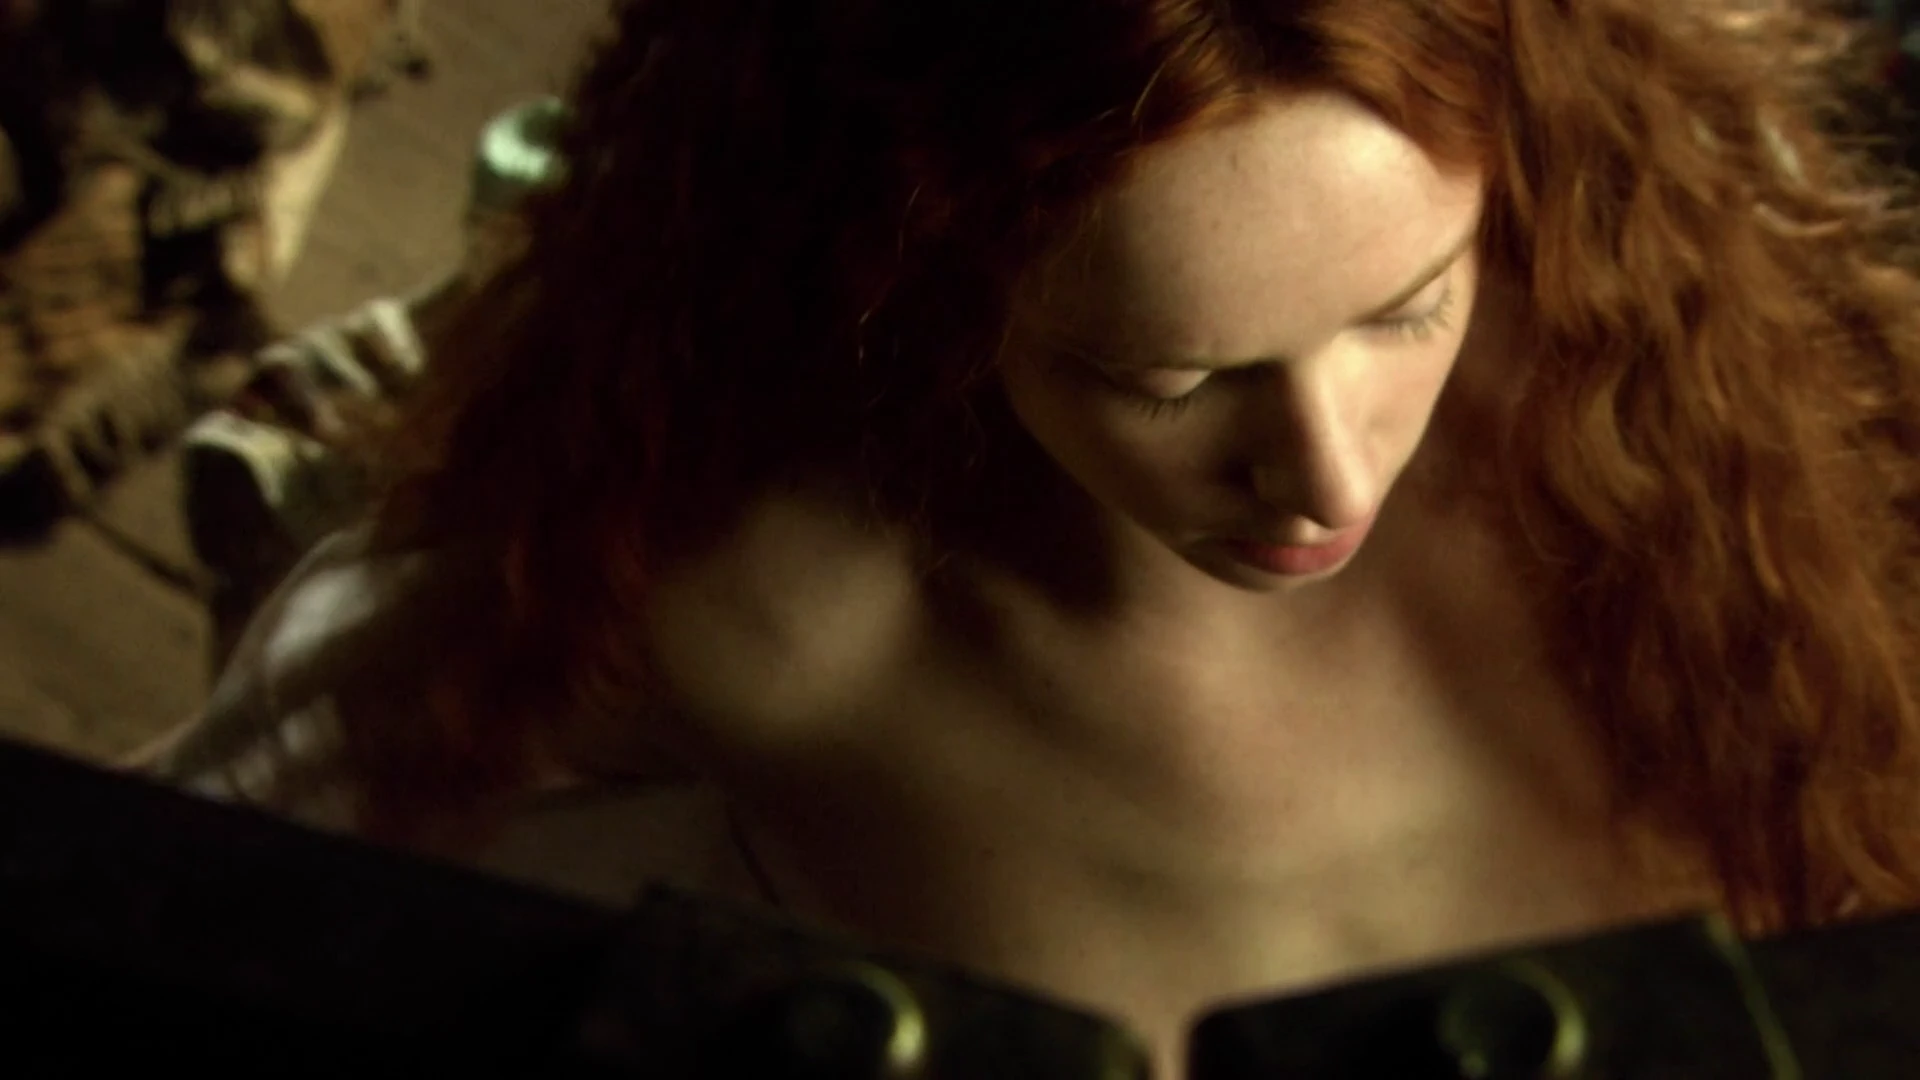 Amy Manson (The Nevers) nude scenes compilation from BBC series Desperate Romantics (2009)